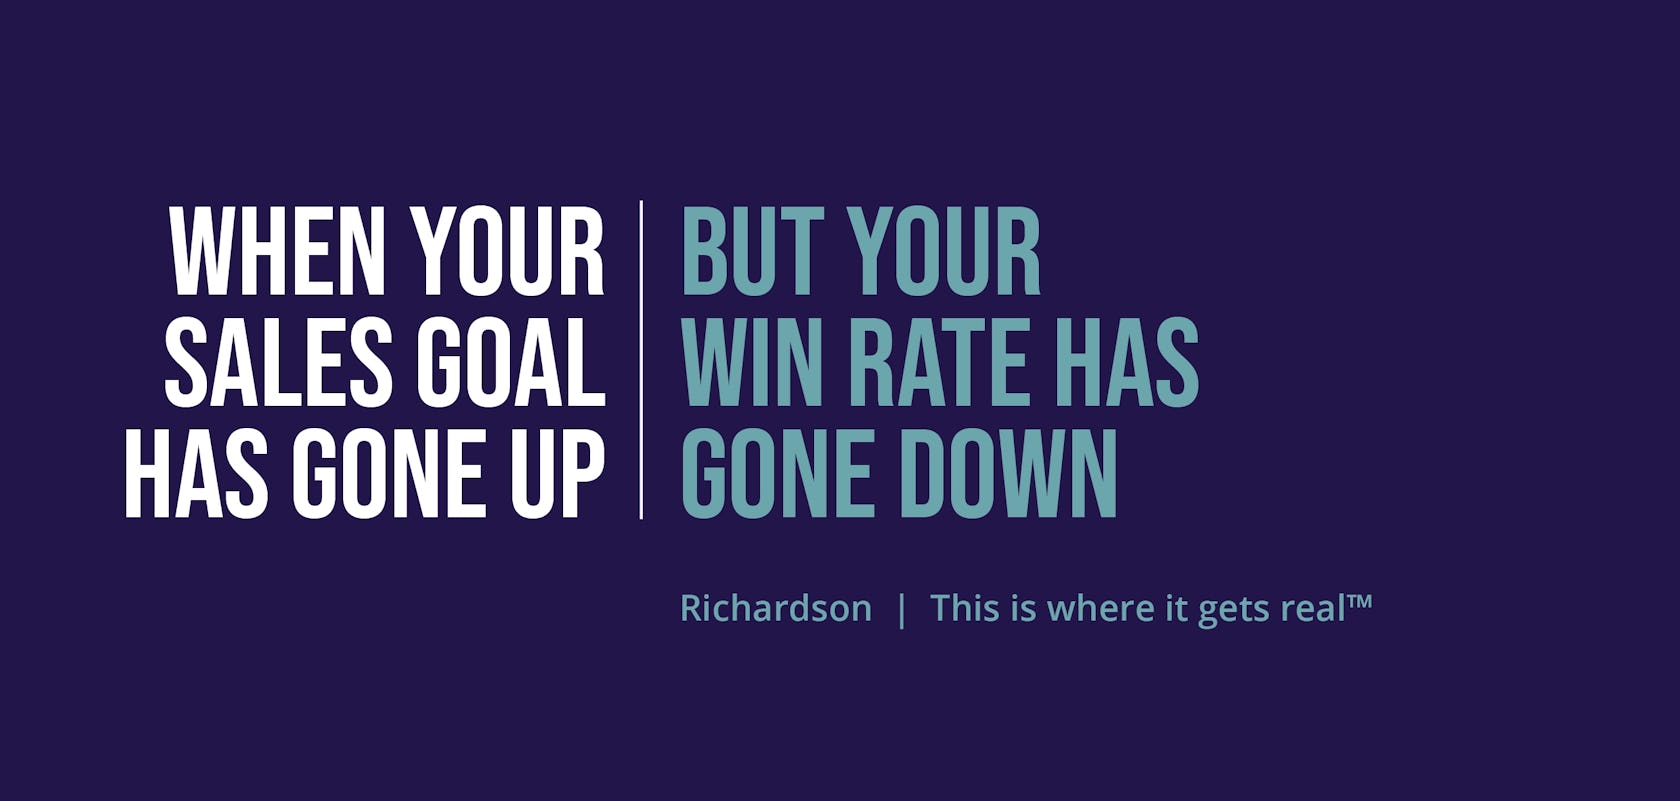 header stating - when your sales goal has gone up, but your win rate has gone down | Richardson - this is where it get's real